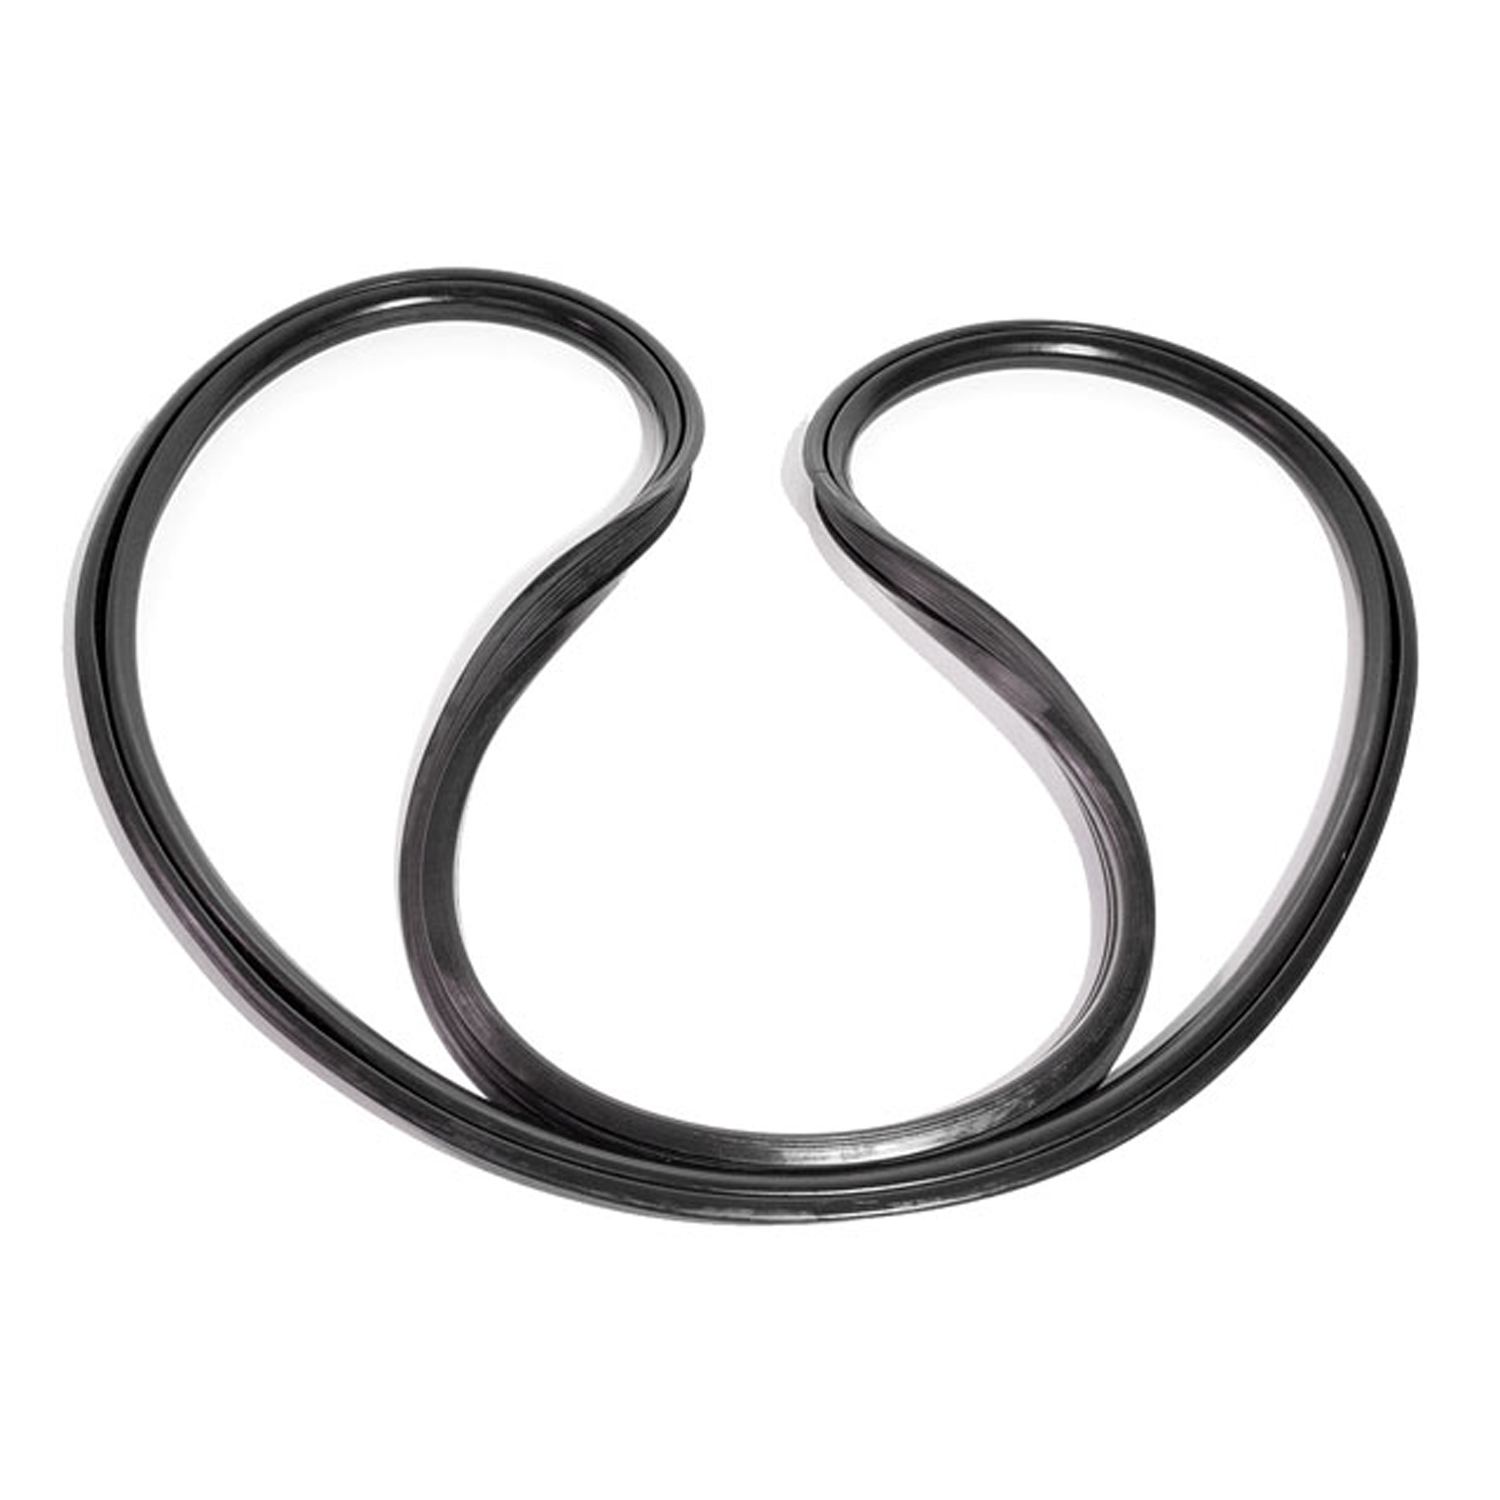 1952 Oldsmobile Deluxe 88 Vulcanized Windshield Seal.  For hardtops and convertibles-VWS 7300